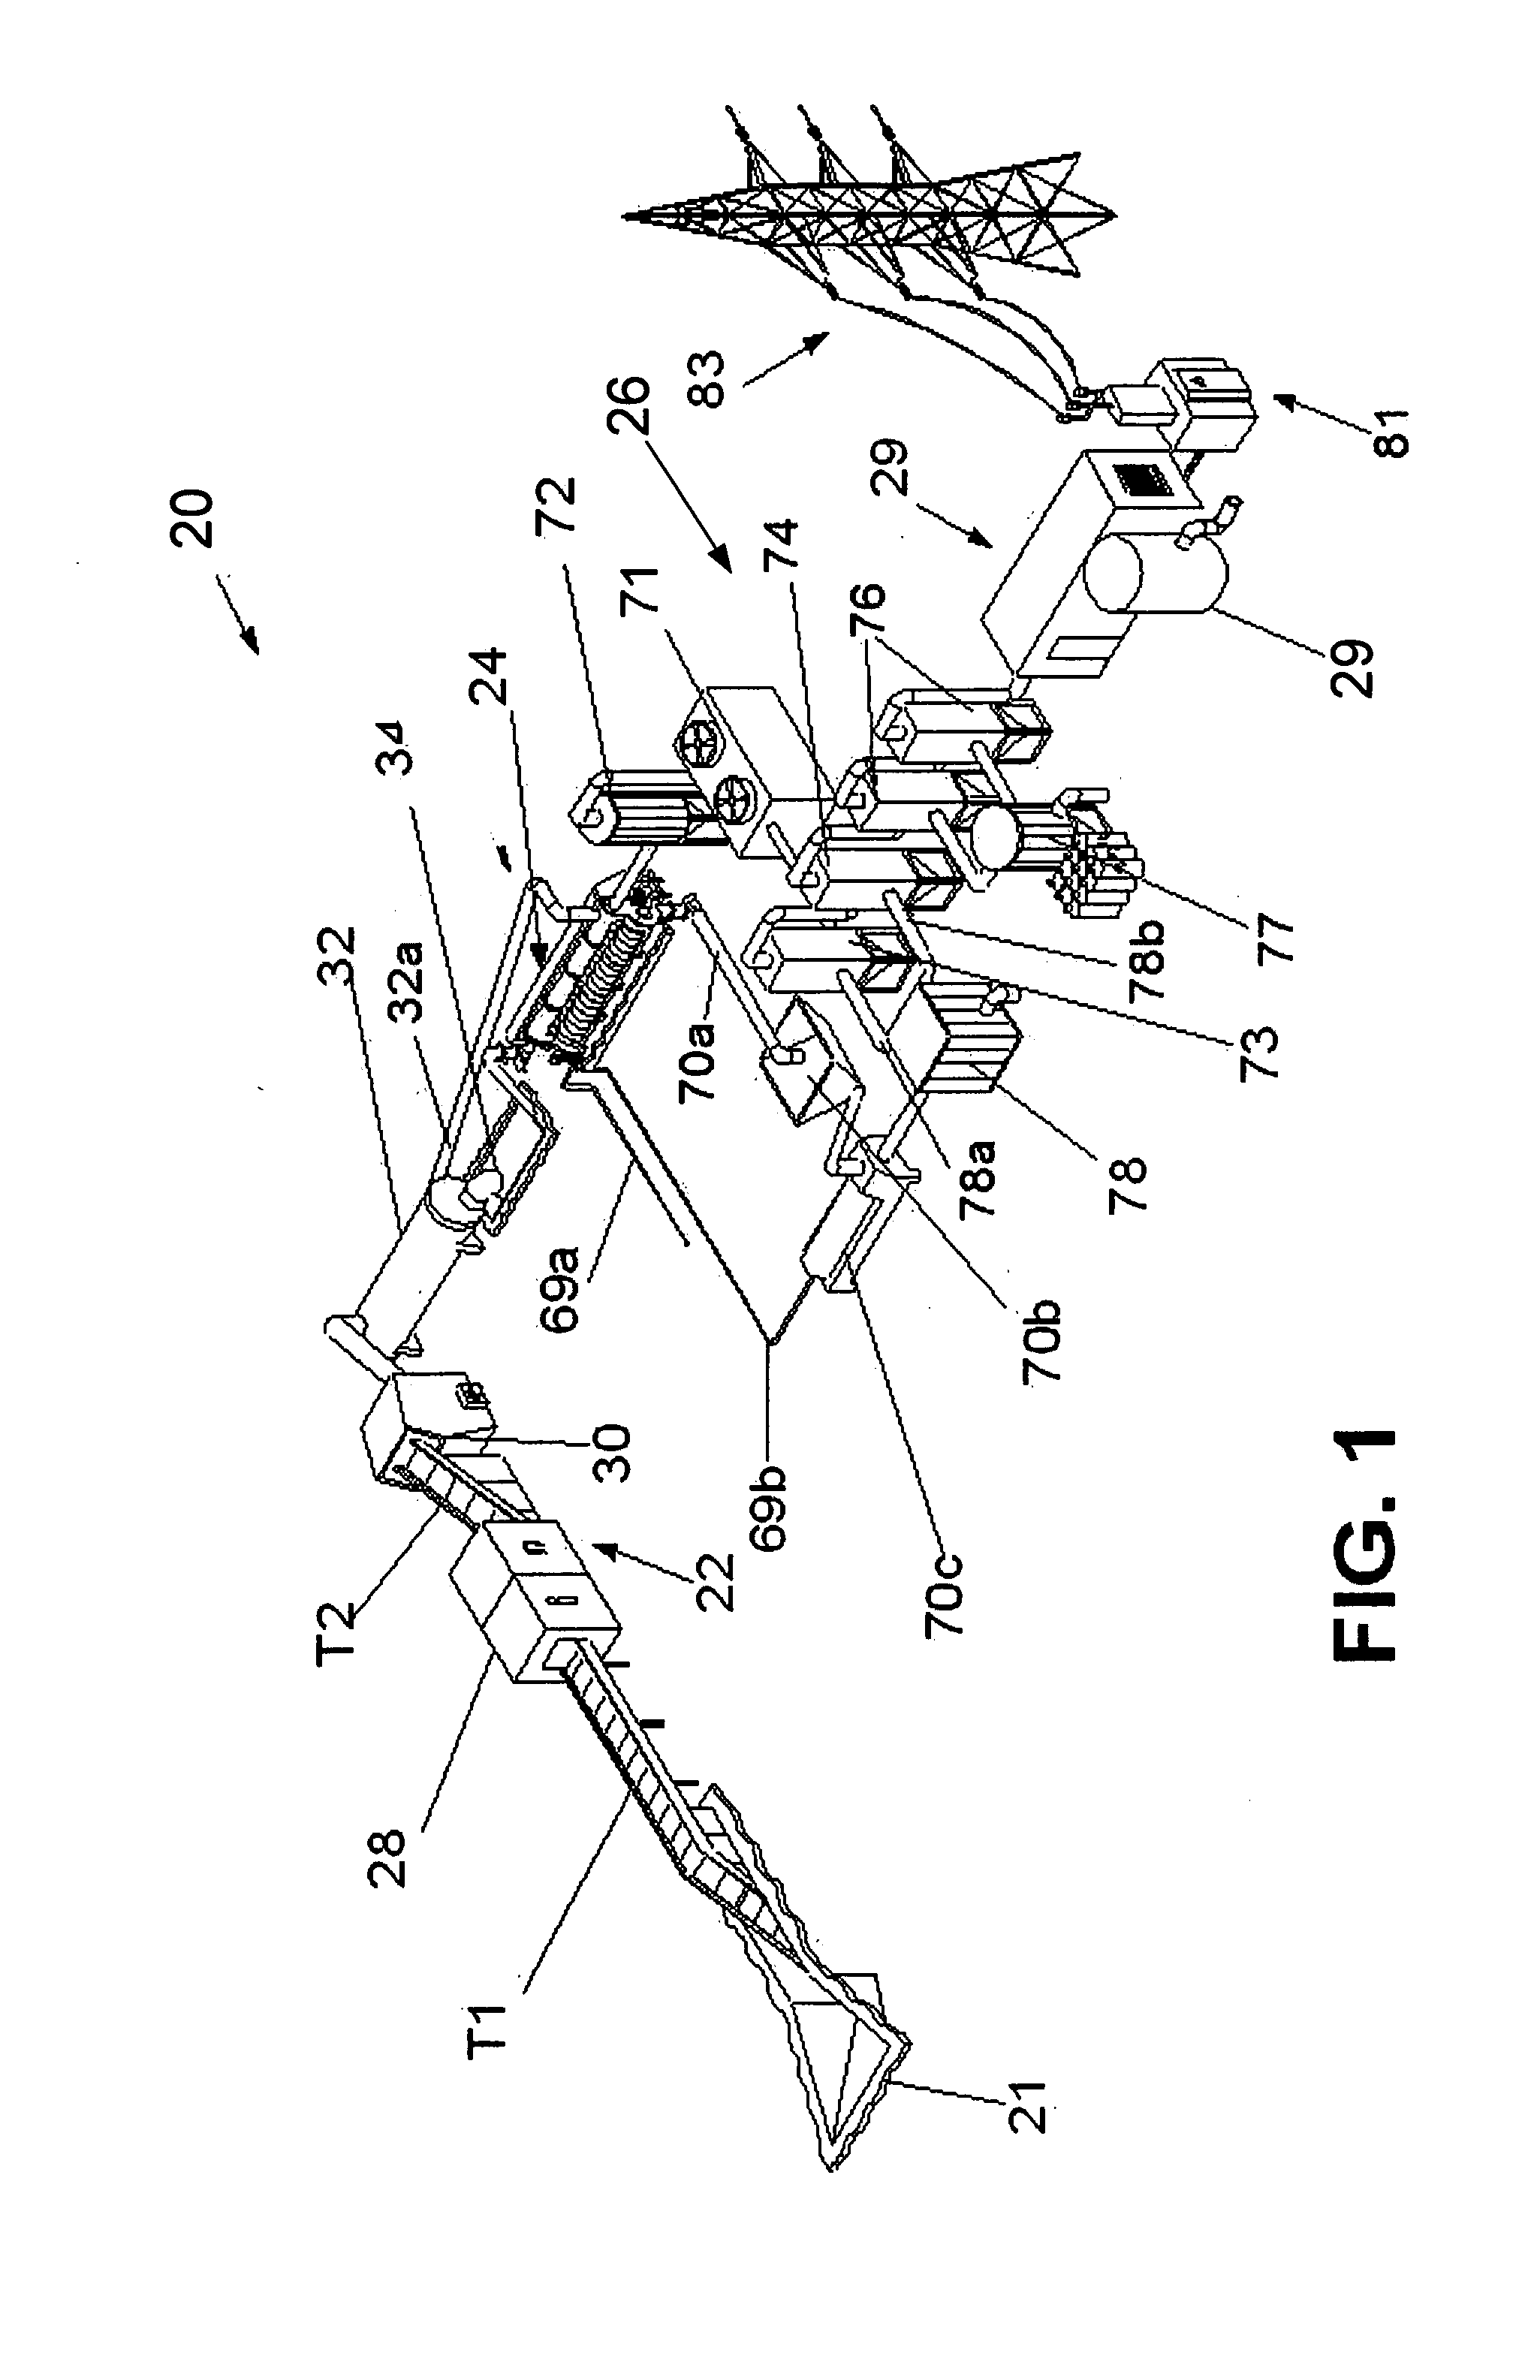 Method and system for wasteless processing and complete utilization of municipal and domestic wastes